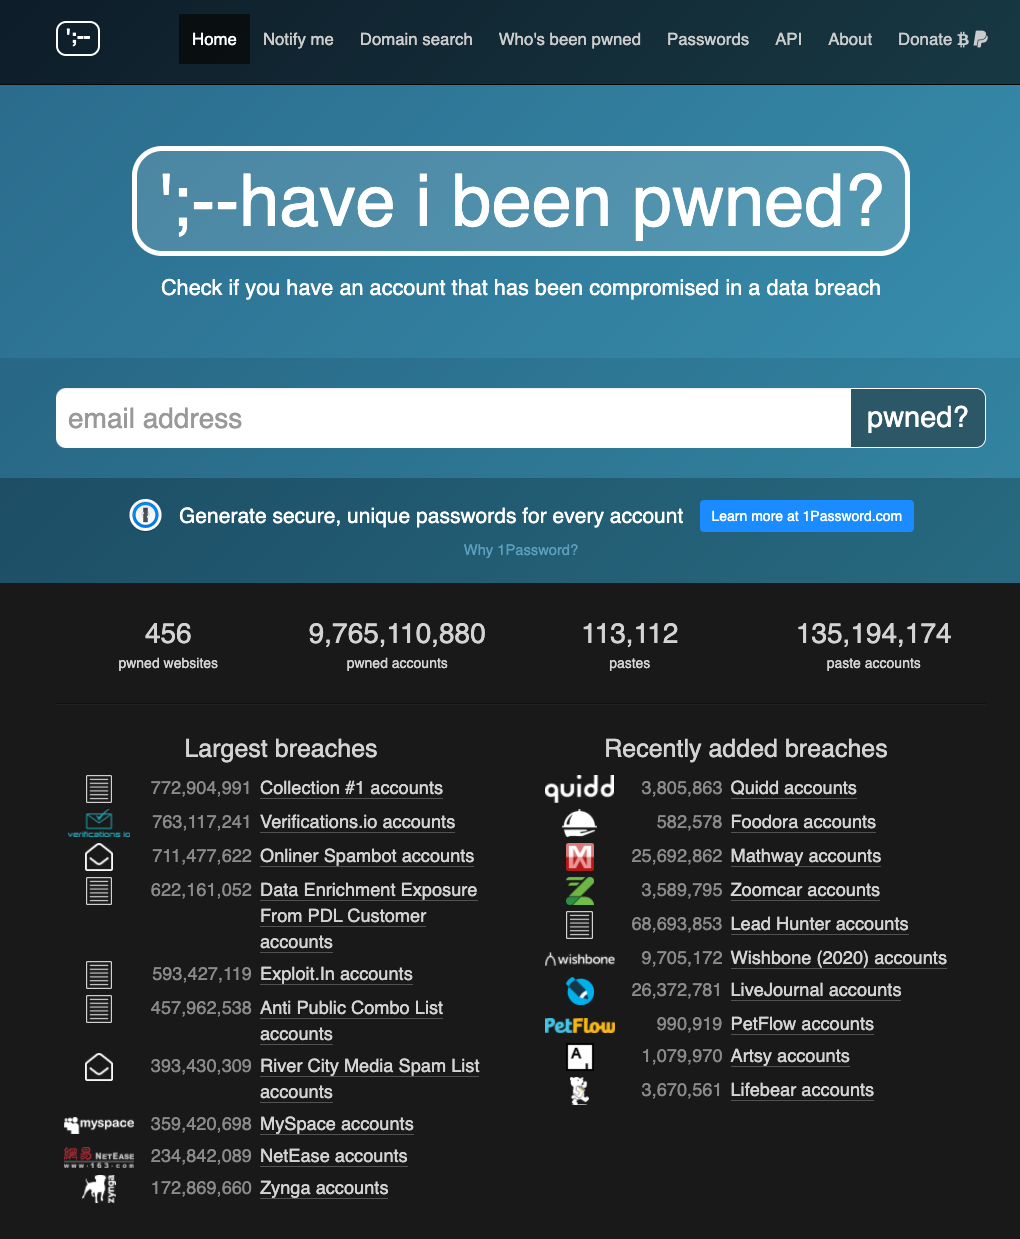 What Does it Mean to Be Pwned? Find out!